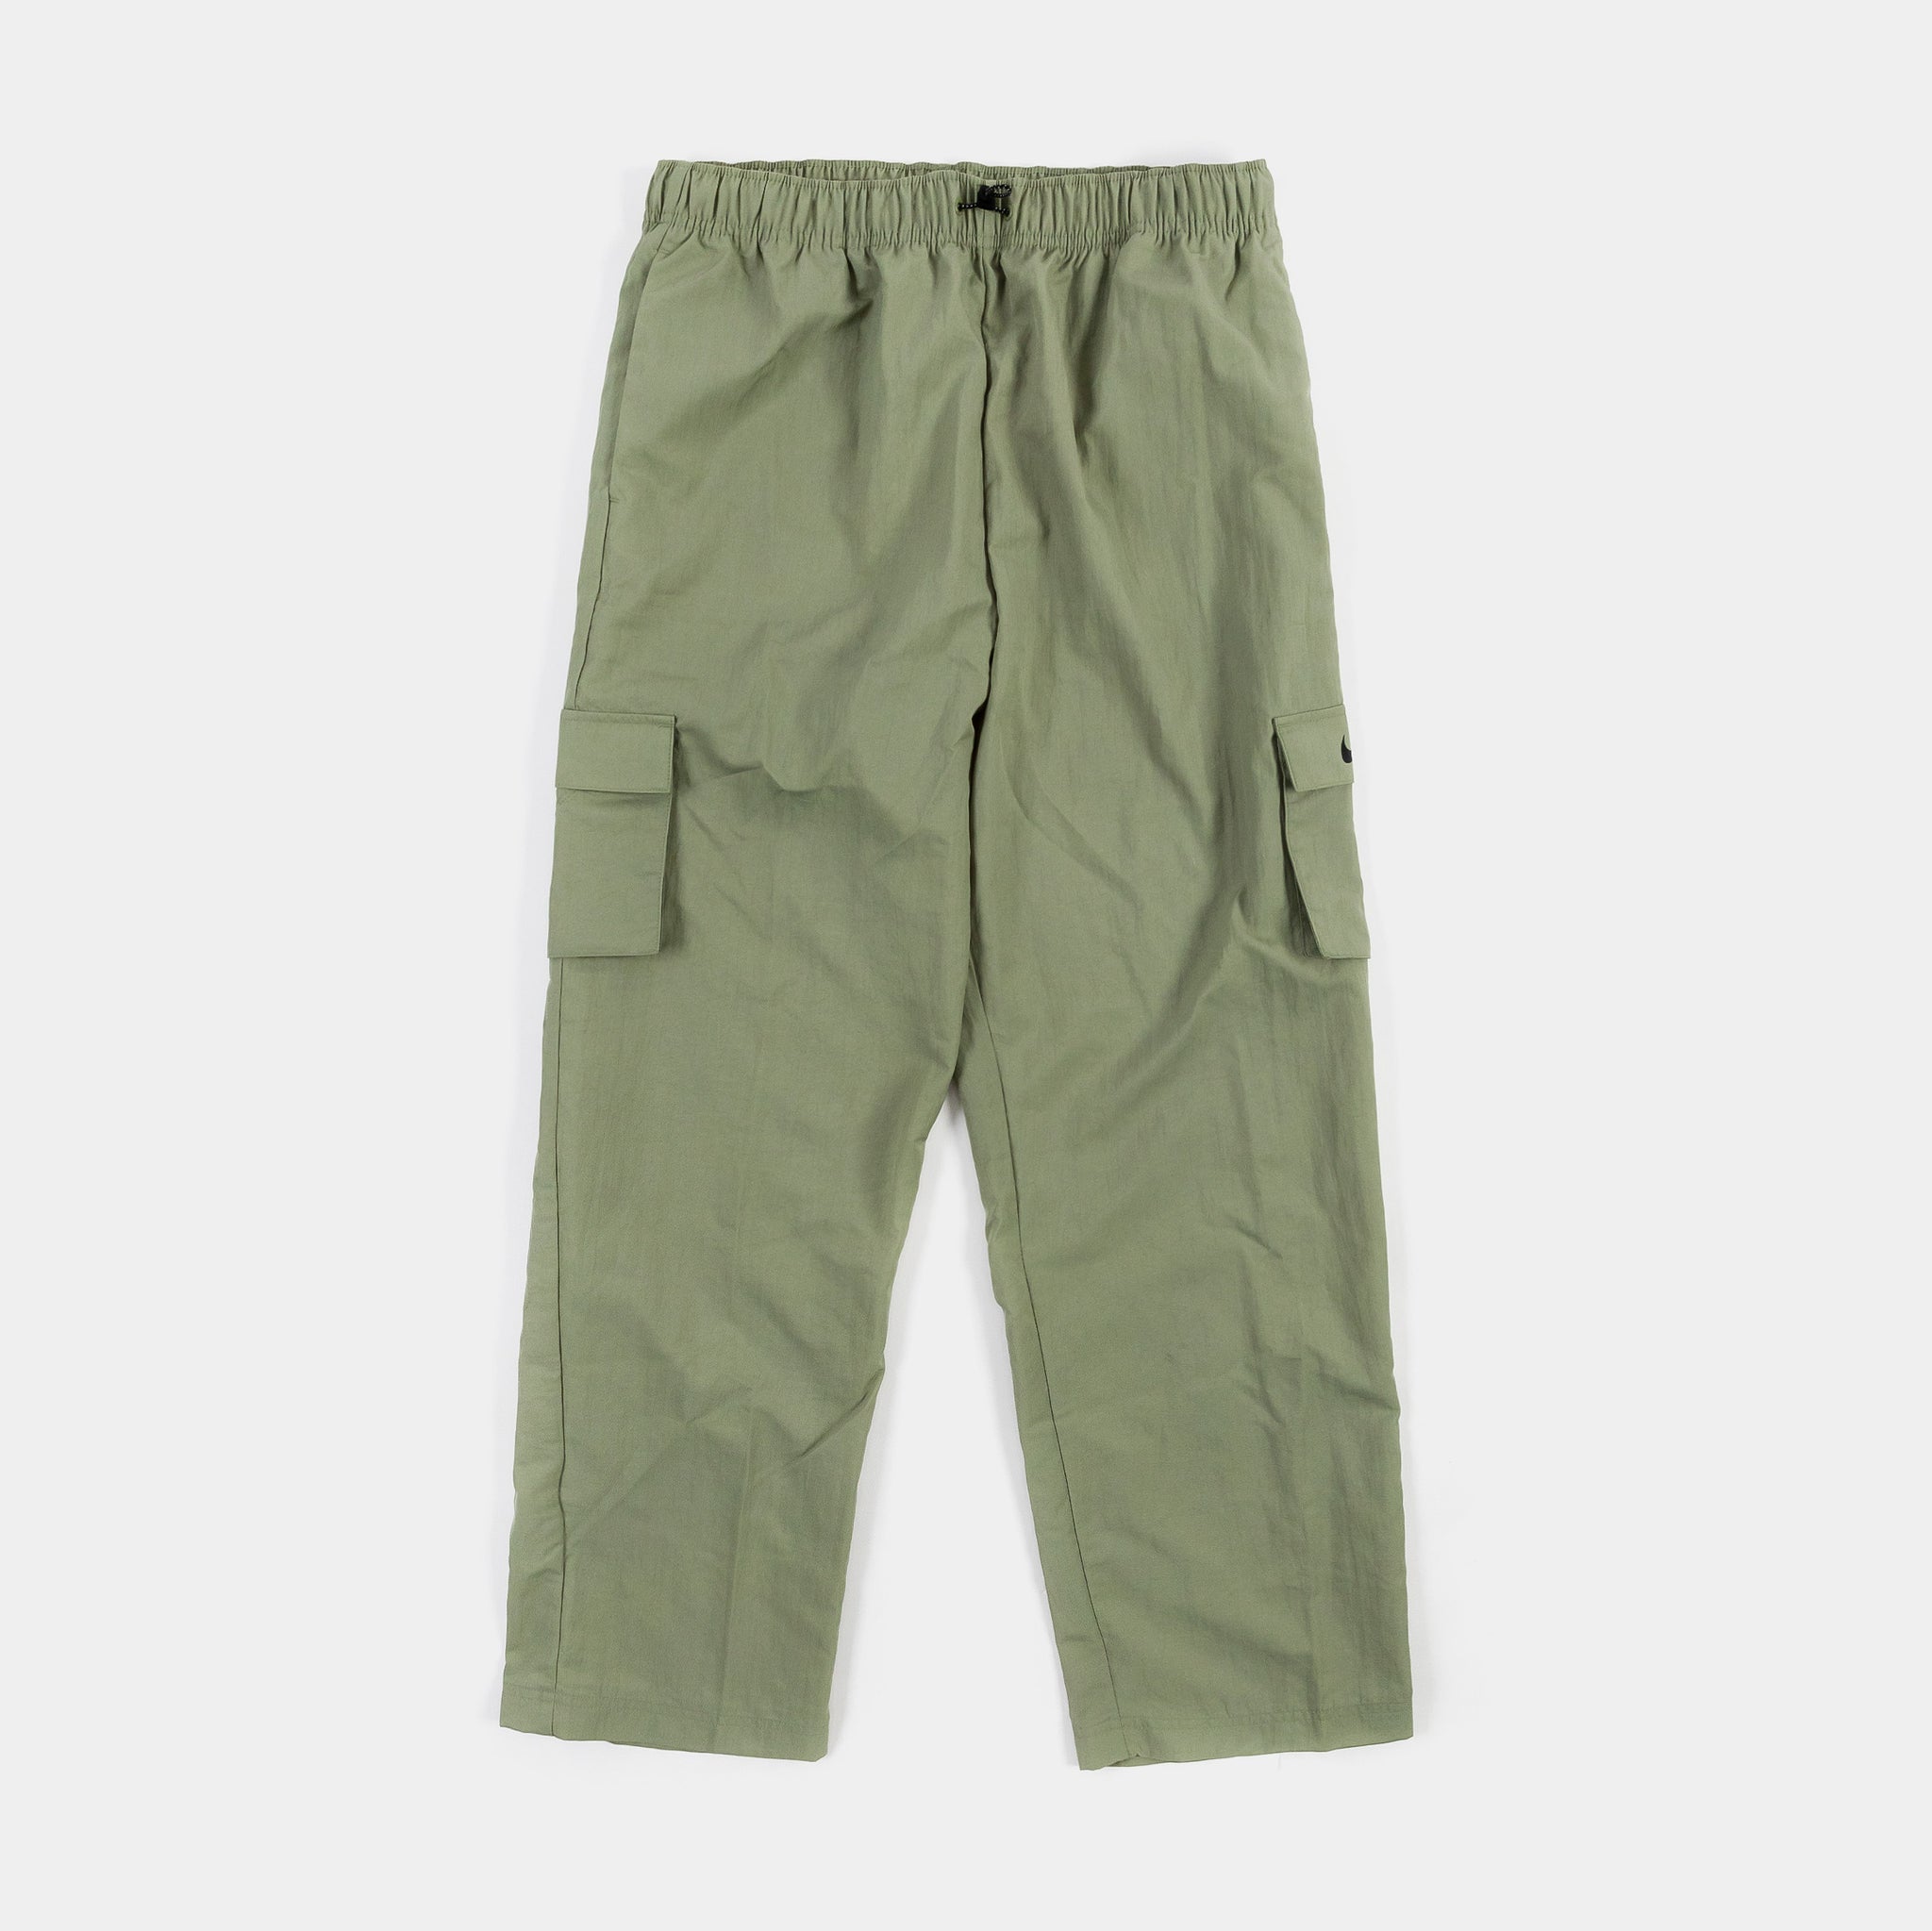 Shorts | Men's Cargo Half Pant (New) 28,30,32 Size Available | Freeup